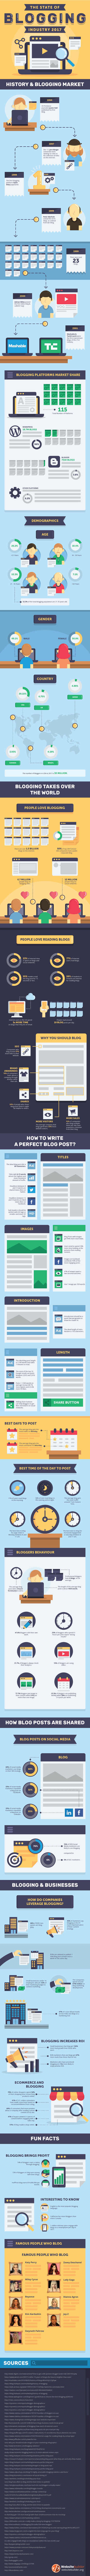 Blogging for Beginners infographic 